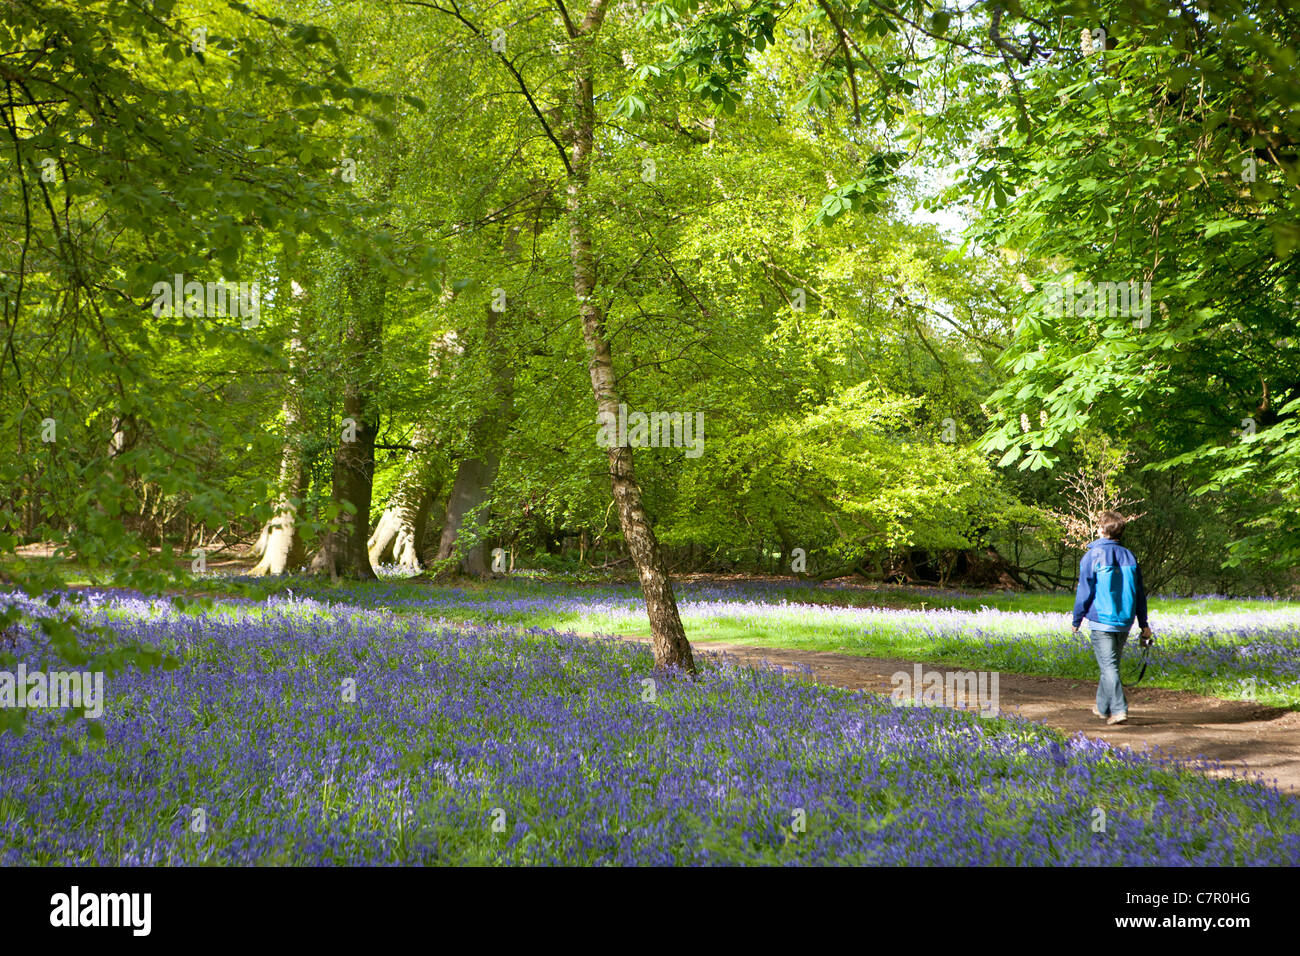 PERSON WALKING IN BLUEBELL FIELDS IN HAUGHLEY PARK Stock Photo